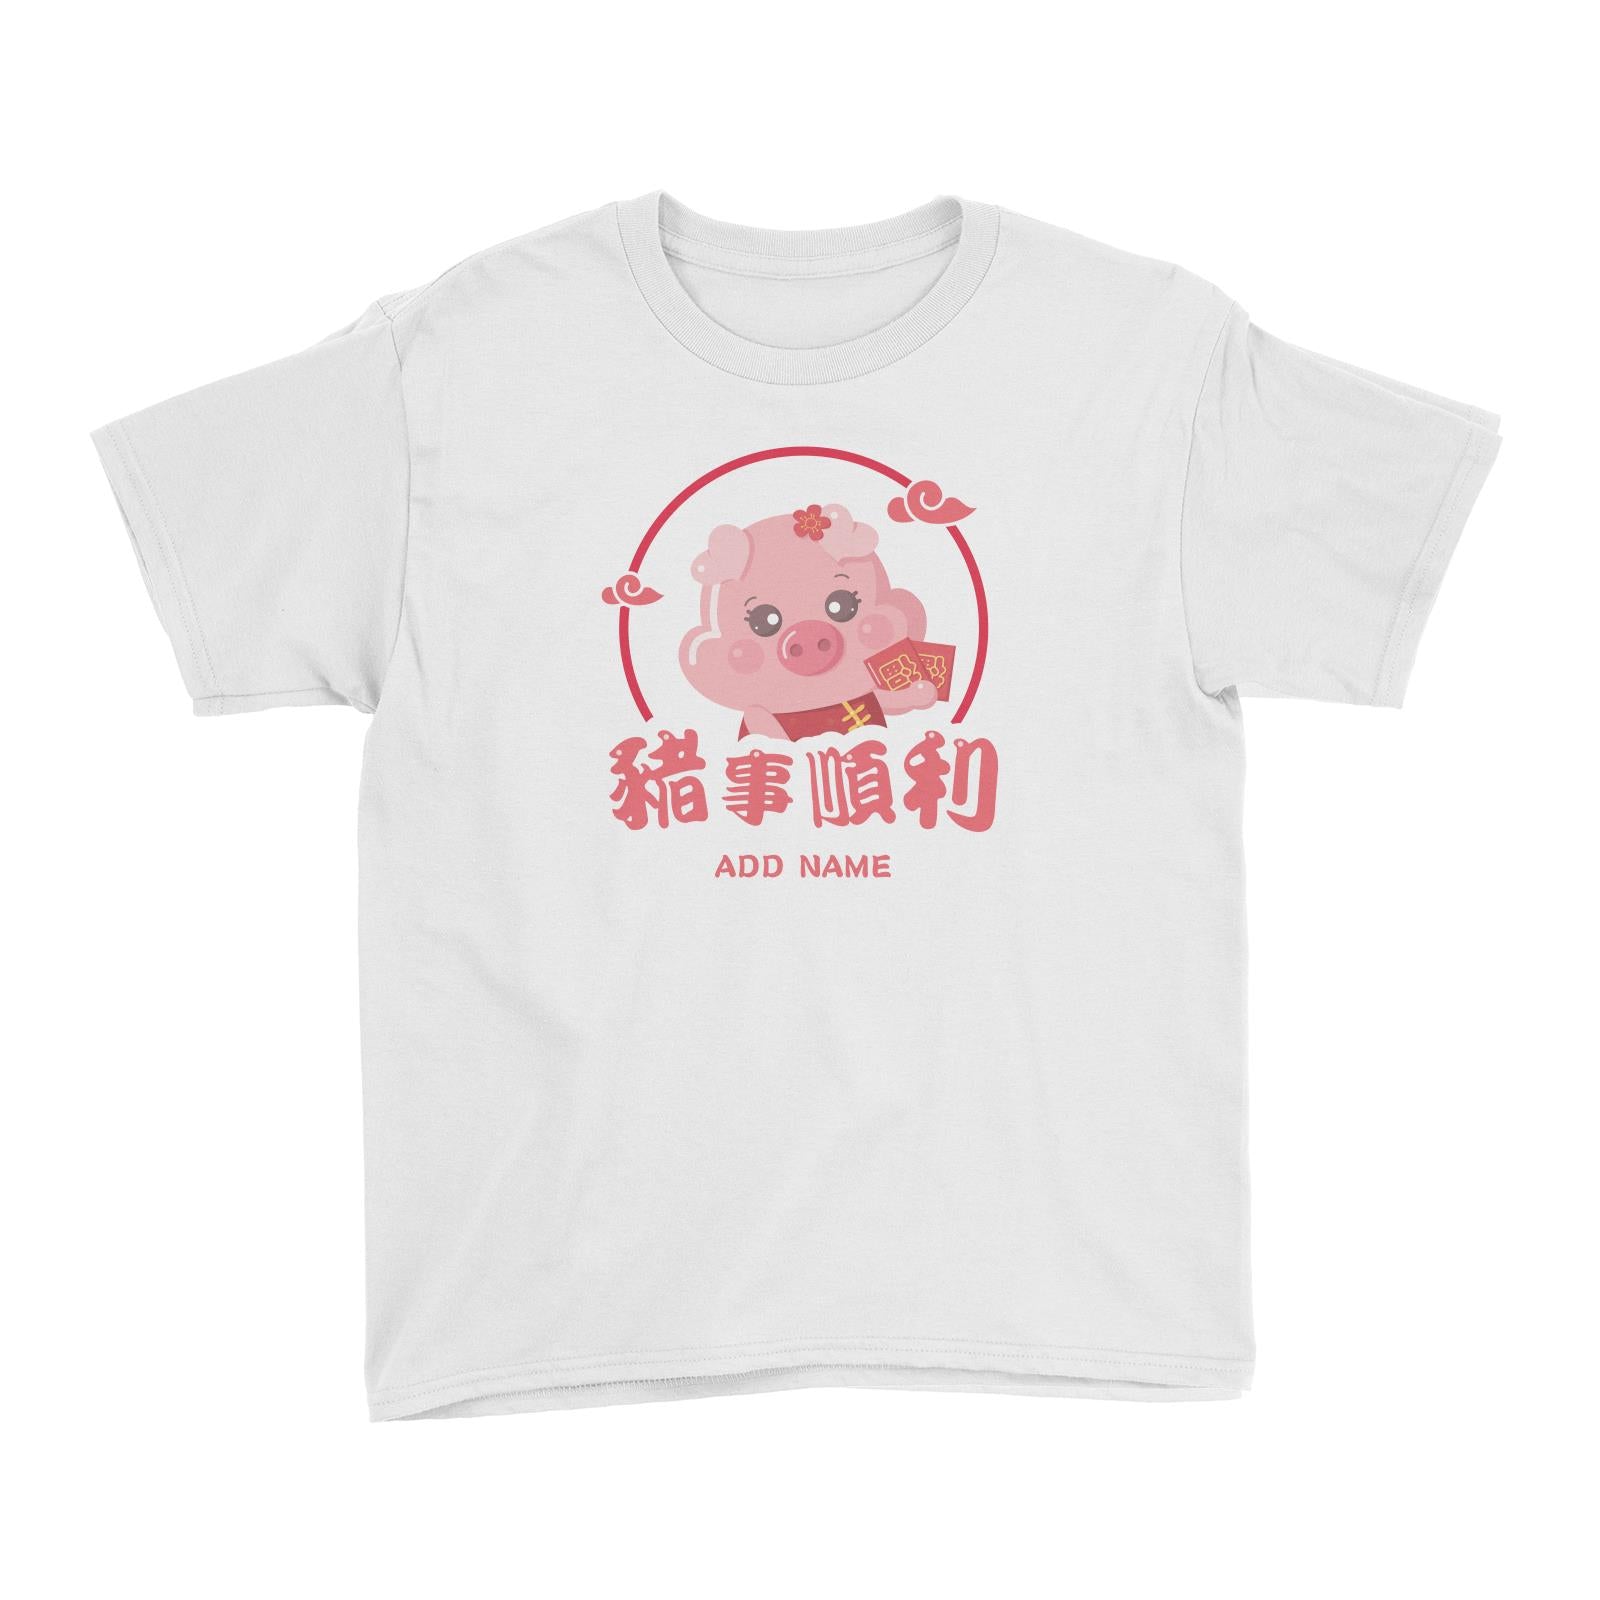 Chinese New Year Cute Pig Emblem Girl With Addname Kid's T-Shirt